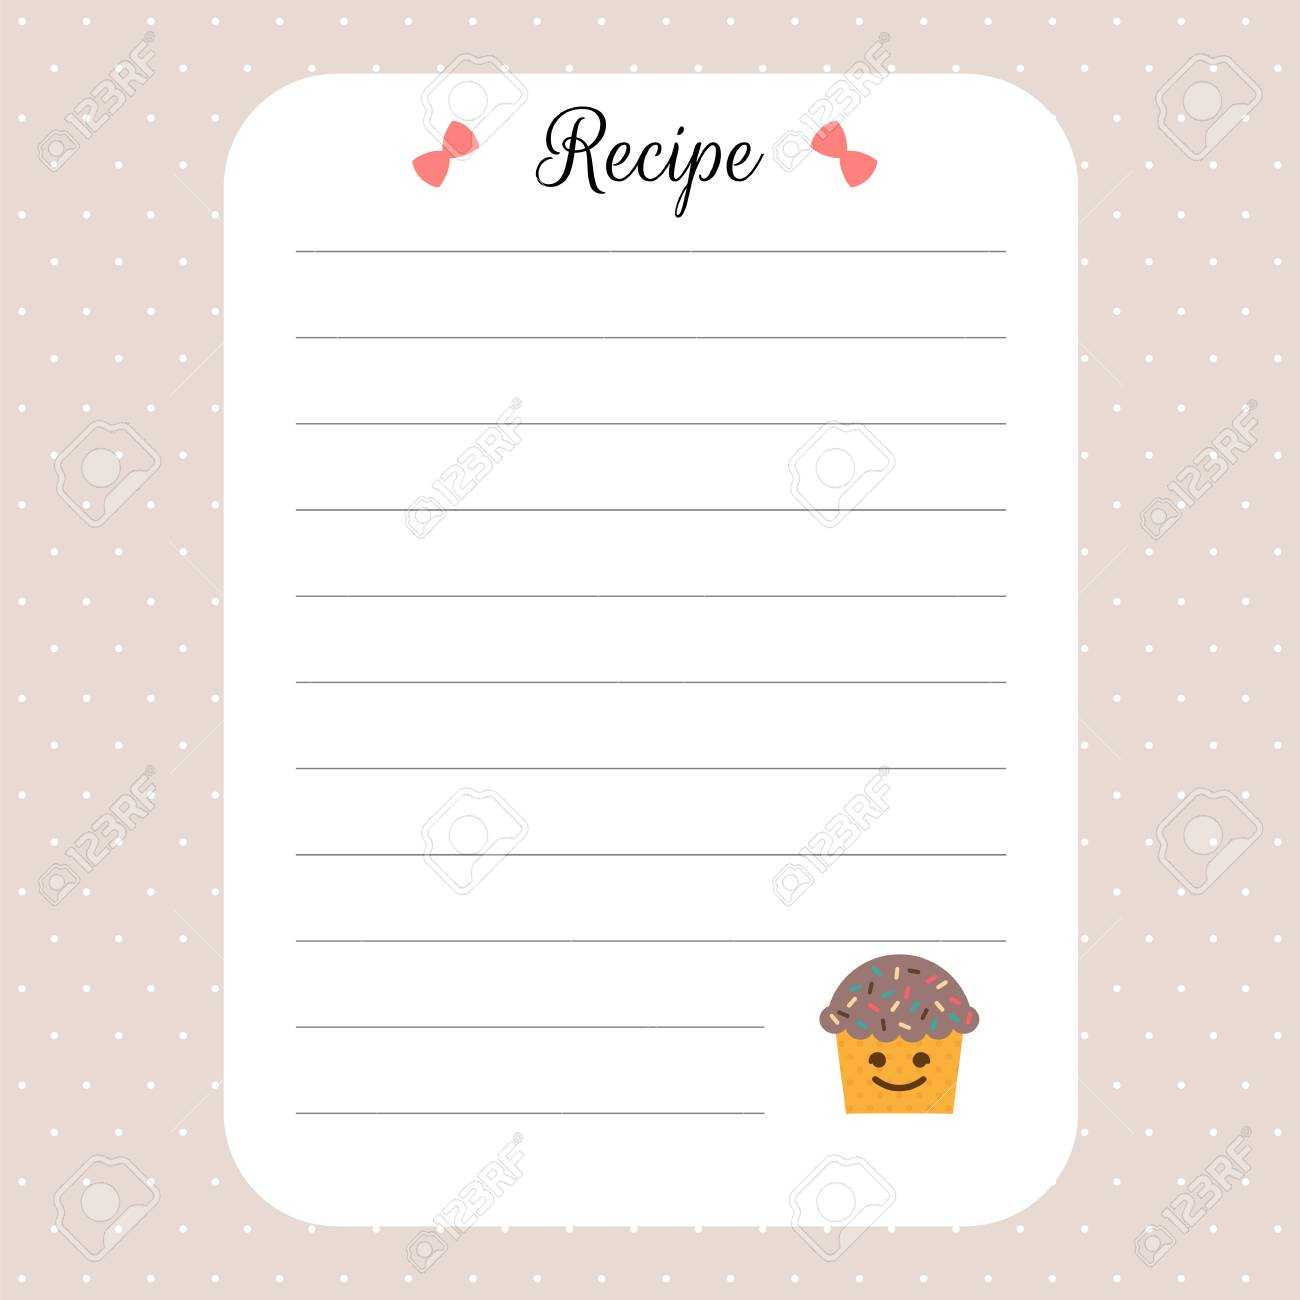 Recipe Card Template. Cookbook Template Page. For Restaurant,.. Pertaining To Restaurant Recipe Card Template